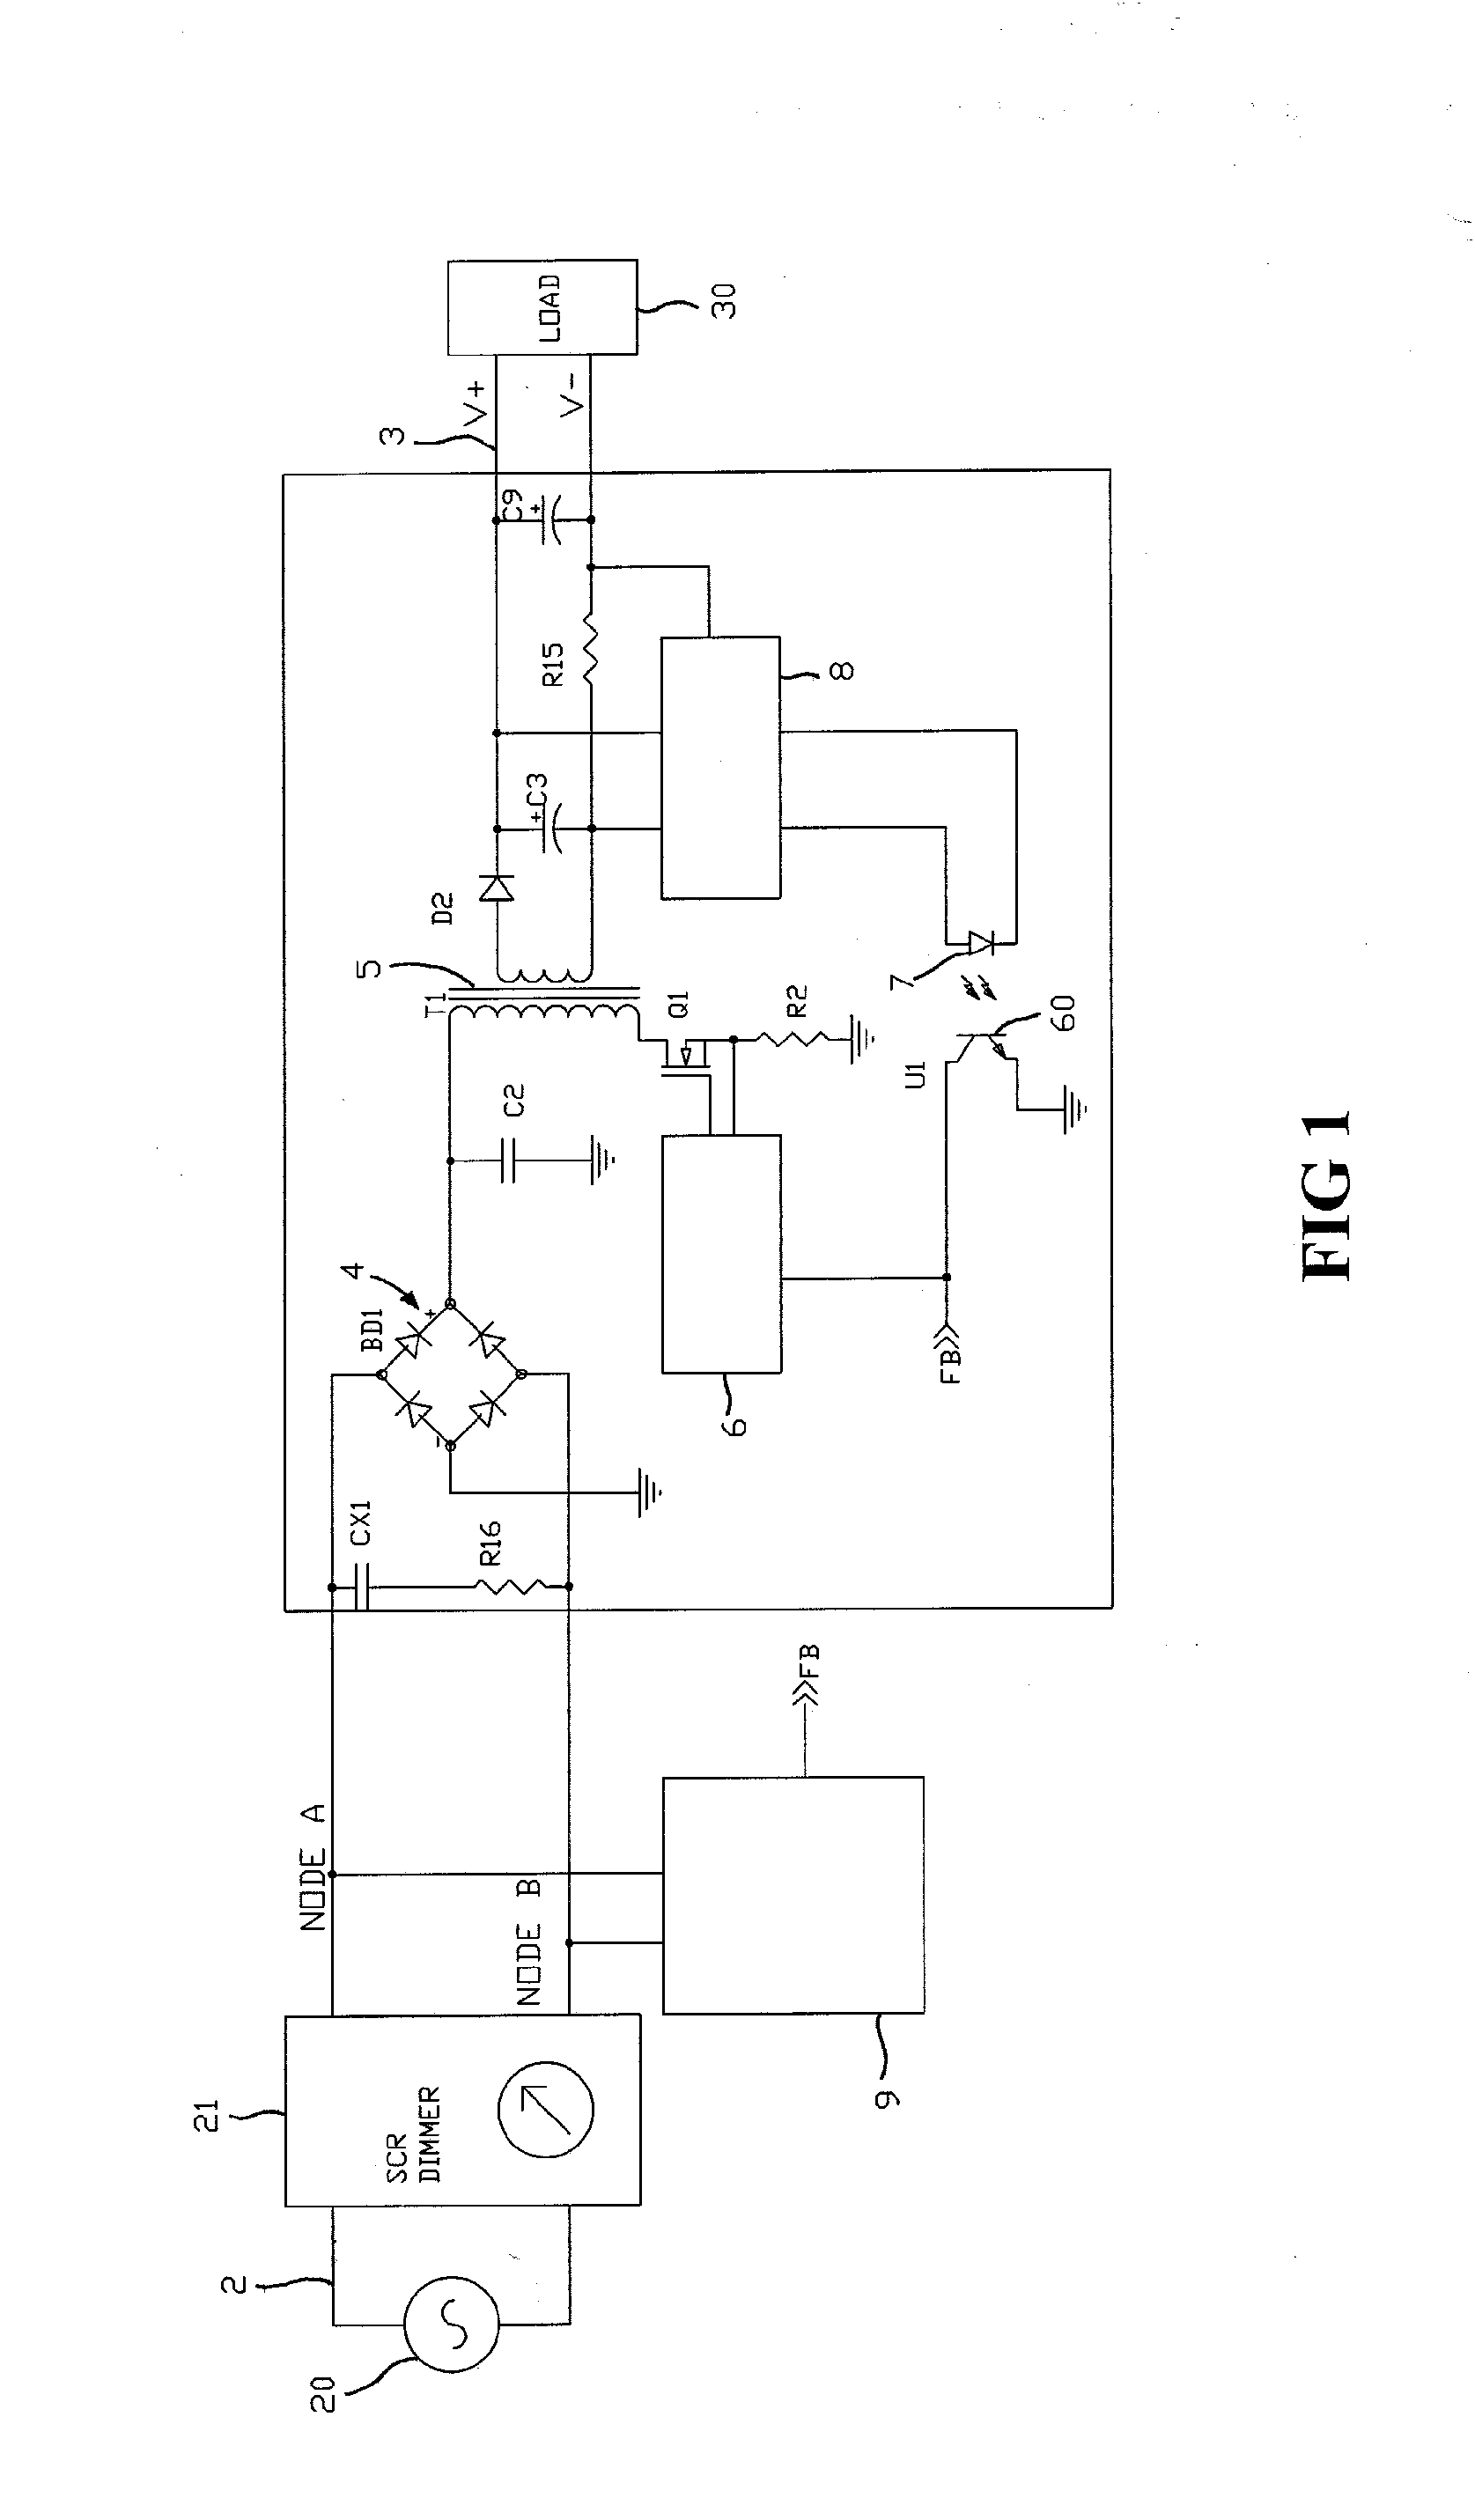 Driving and Dimming Control Device for Illuminator